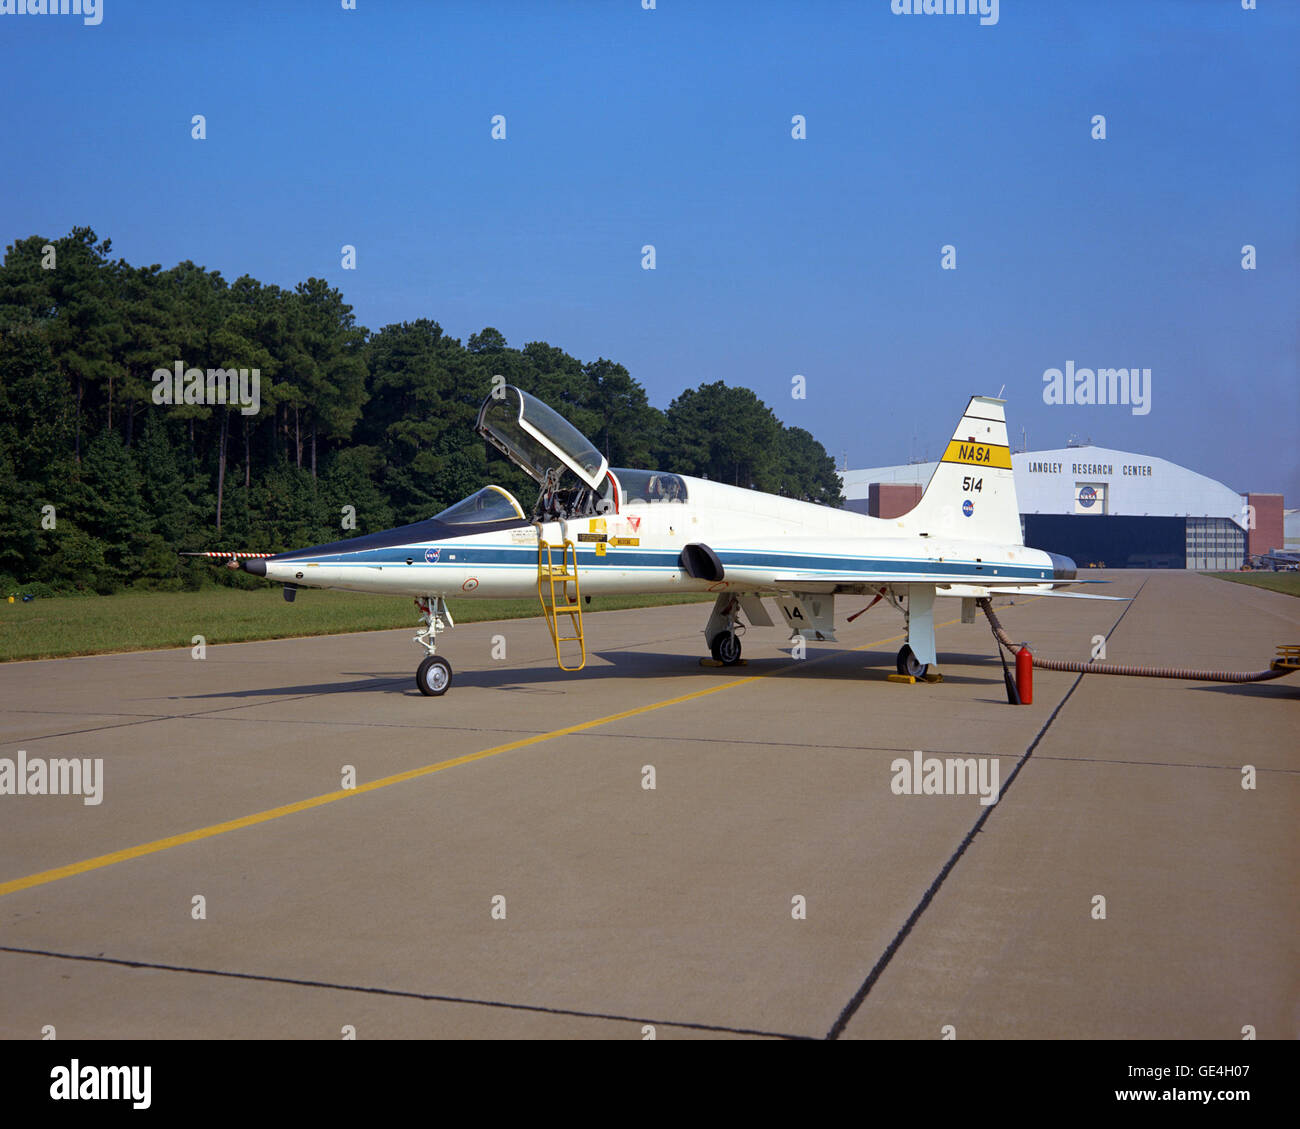 (September 19, 1974) This Northrop T-38A flew at Langley from 1972 until 1980, when it was returned to the Johnson Space Center's flight operations at Ellington AFB, Texas. While at Langley, the Talon flew as a mission support aircraft and participated in aircraft noise studies. It was also used as an adversary against the XV-6A Kestrel &quot;jump jet&quot; in one-on-one combat to test Vectoring in Forward Flight (VIFF).  Image # : L-1974-05749 Stock Photo